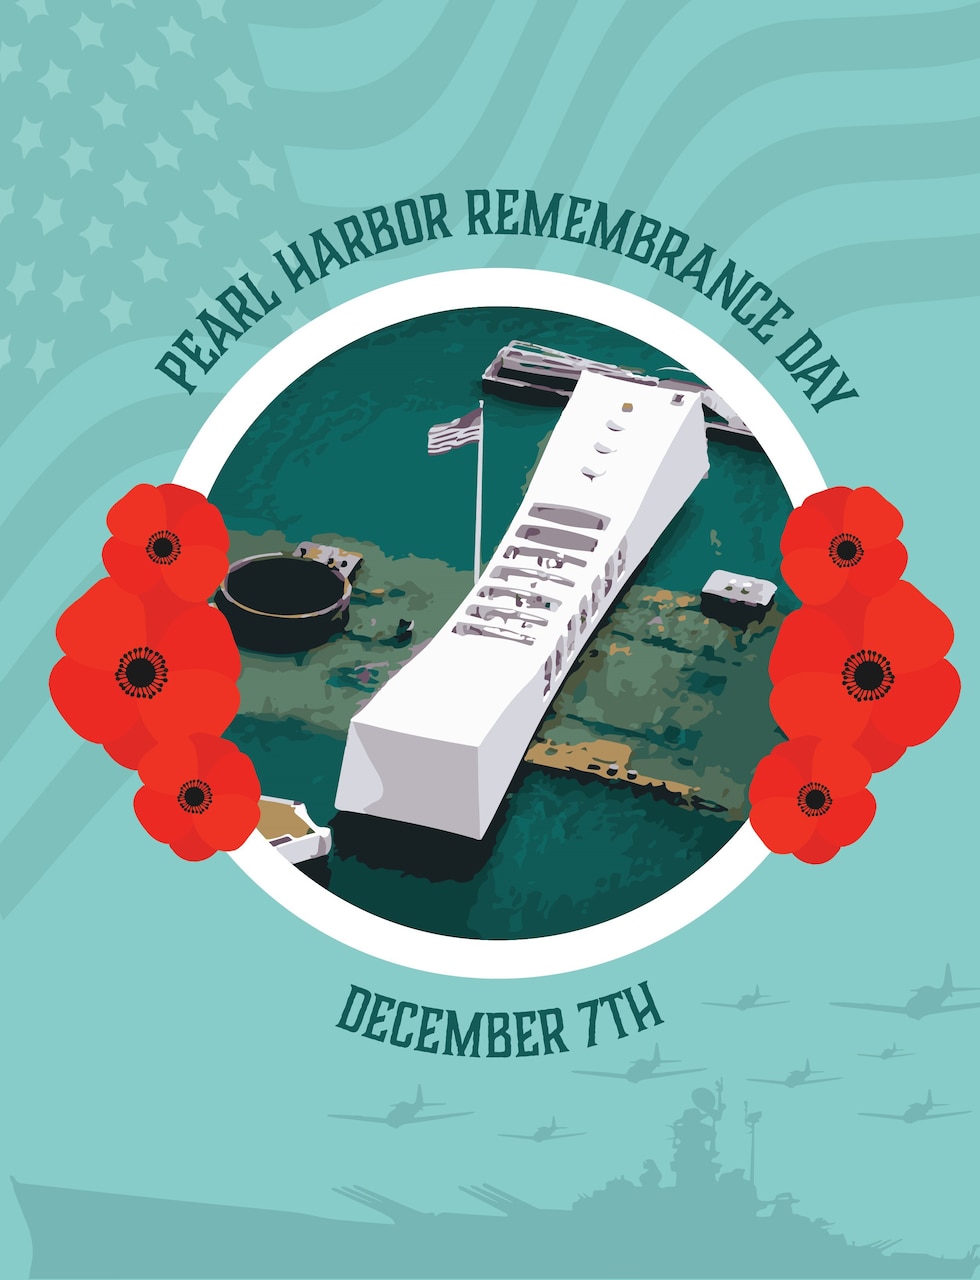 Graphic showing USS Arizona Memorial in a circular inset with red poppies bordering it.